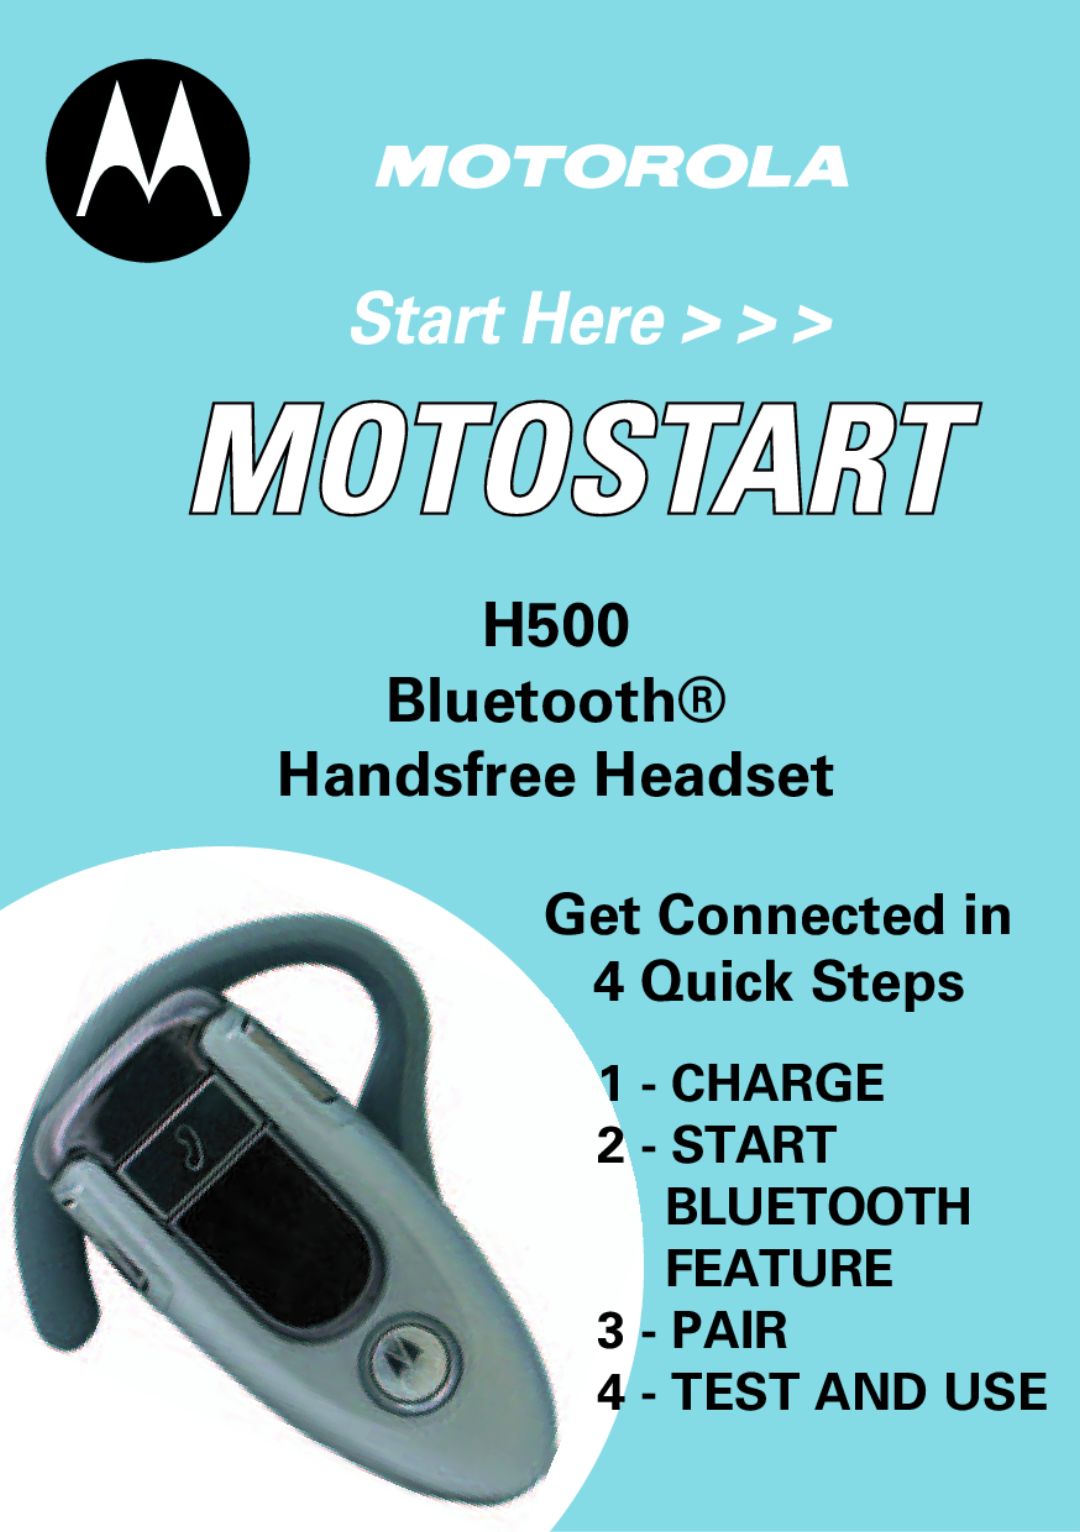 Motorola manual H500 Bluetooth Handsfree Headset, Start Here, Get Connected in 4 Quick Steps 